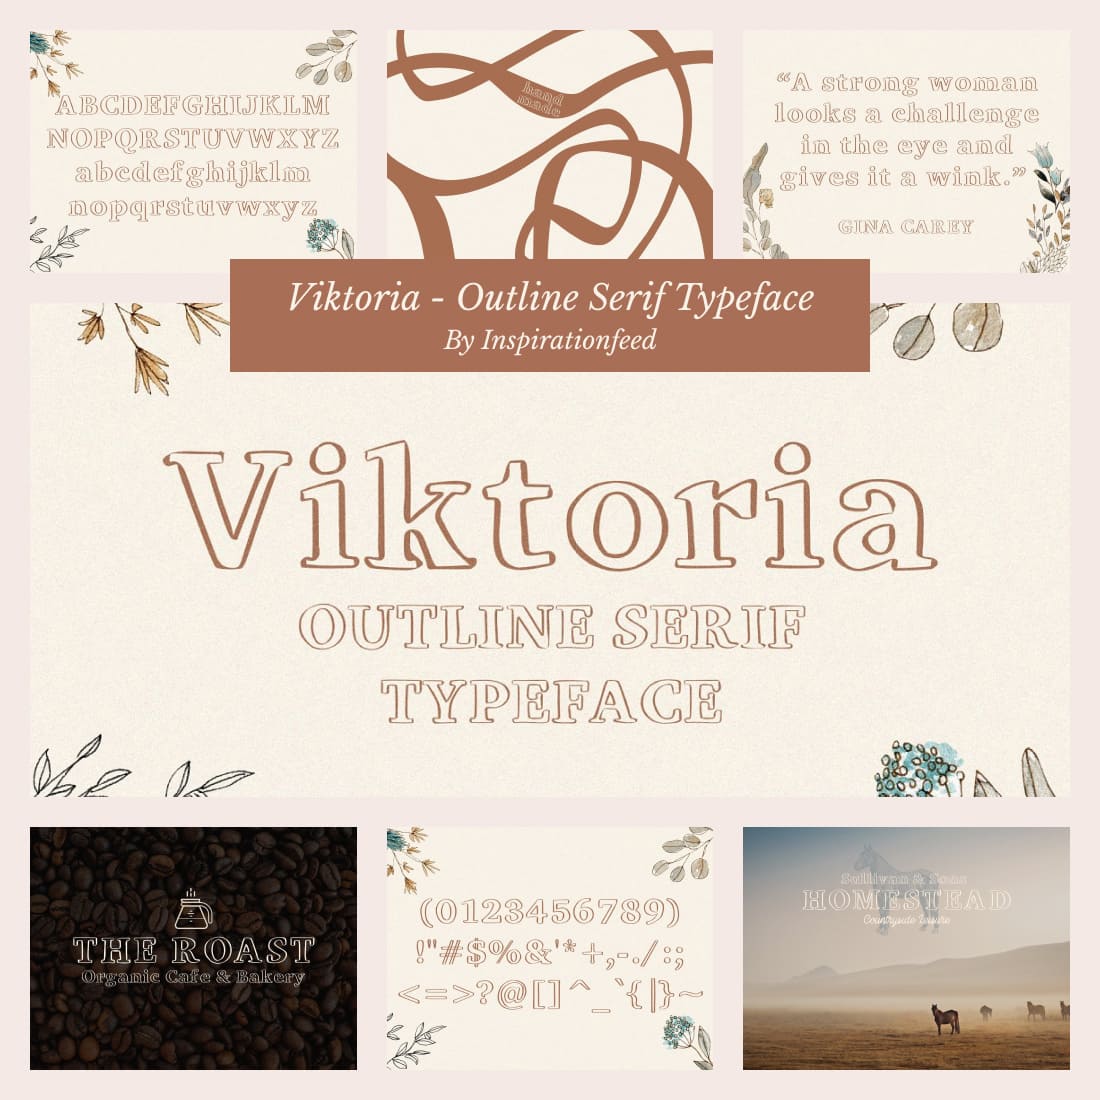 Viktoria - Outline Serif Typeface Preview With Symbols, By Inspirationfeed.